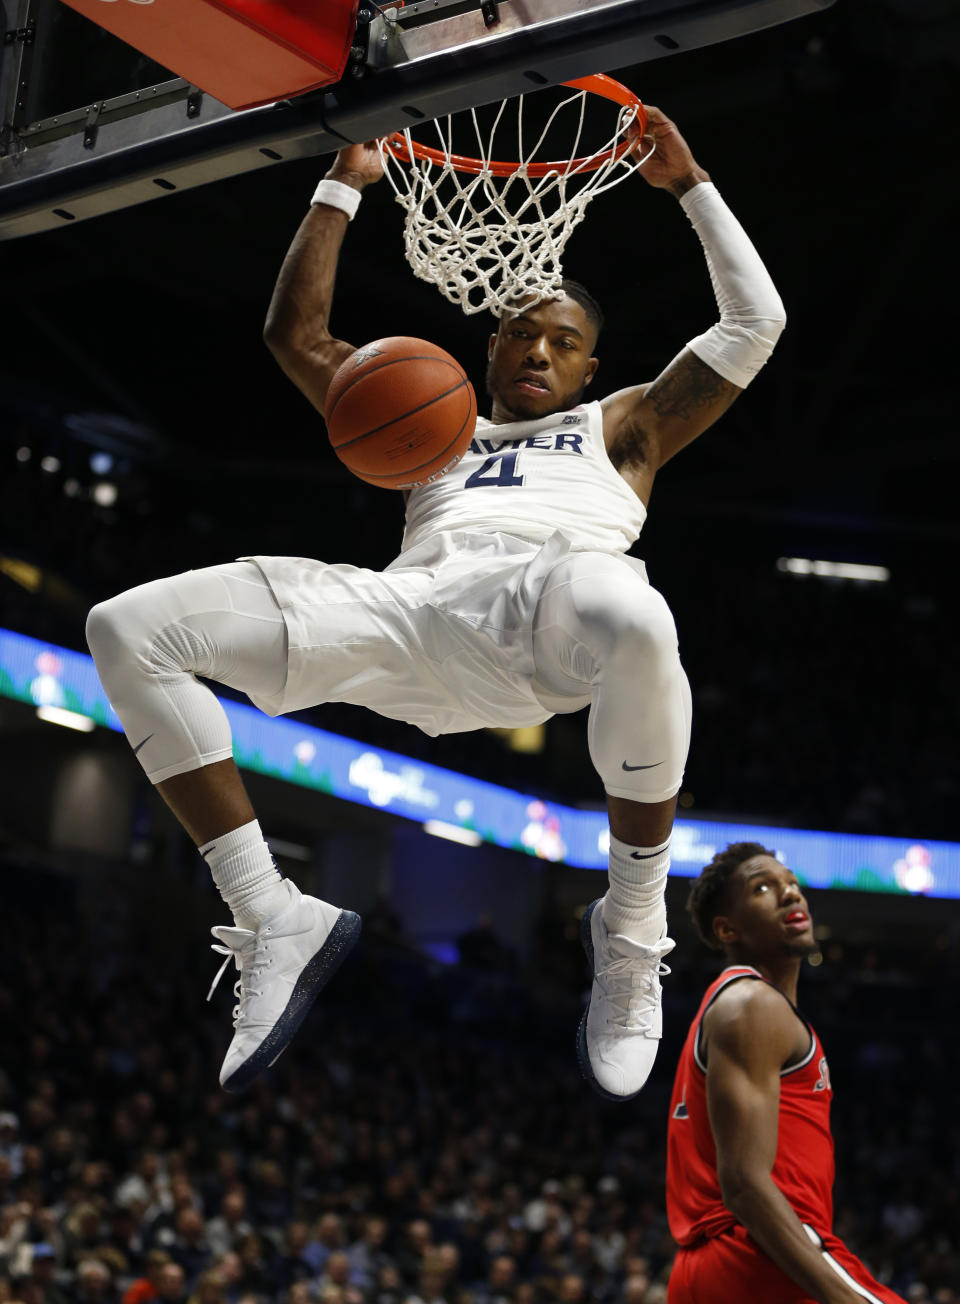 Xavier forward Tyrique Jones (4) dunks in front of St. John's forward Josh Roberts, right, during the first half of an NCAA college basketball game, Sunday, Jan. 5, 2020, in Cincinnati. (AP Photo/Gary Landers)